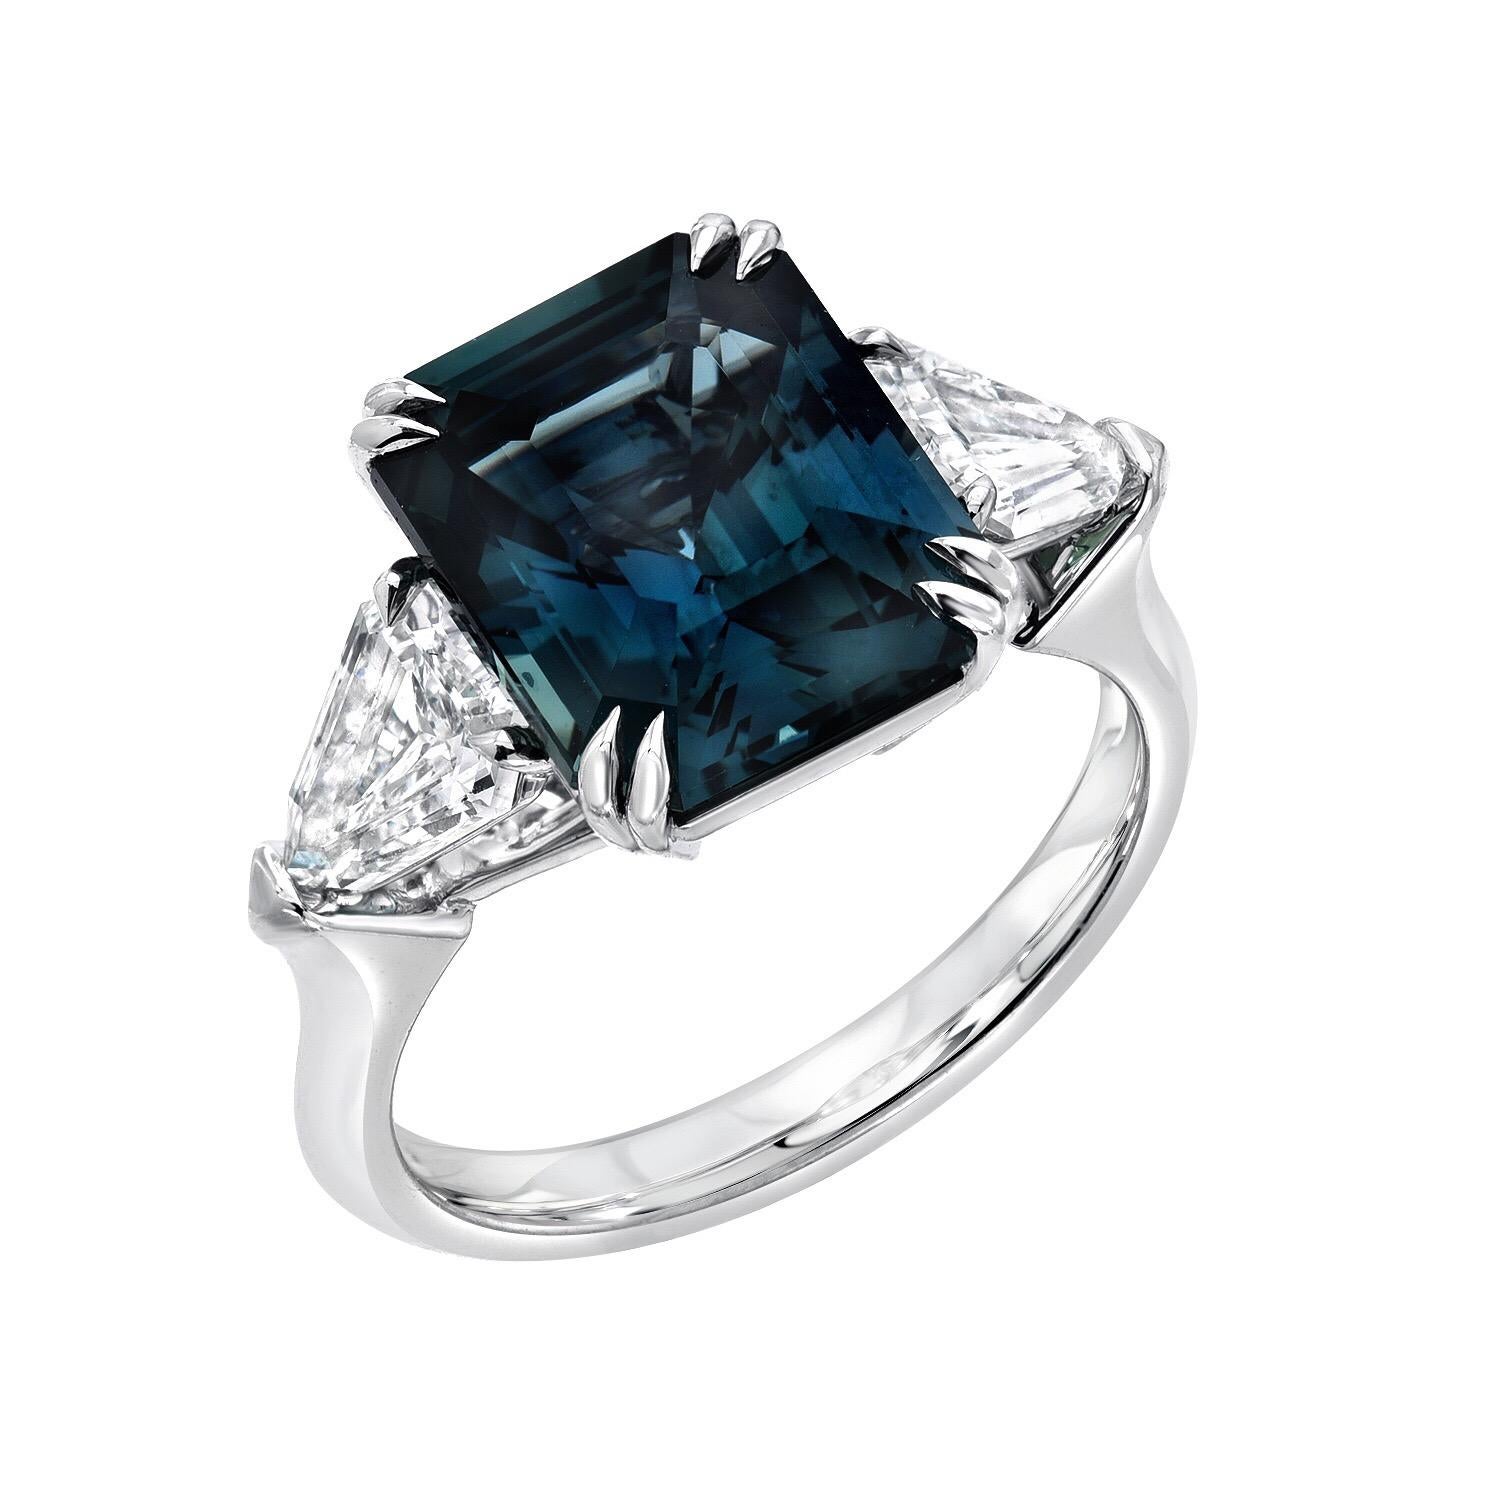 Natural, no heat Sapphire 6.07 carat, emerald cut, platinum ring, displaying a most unique teal, greenish blue color, and is flanked by a pair of shield shaped diamonds E/VS, weighing a total of 1.10 carats.
The GIA certificate is attached to the